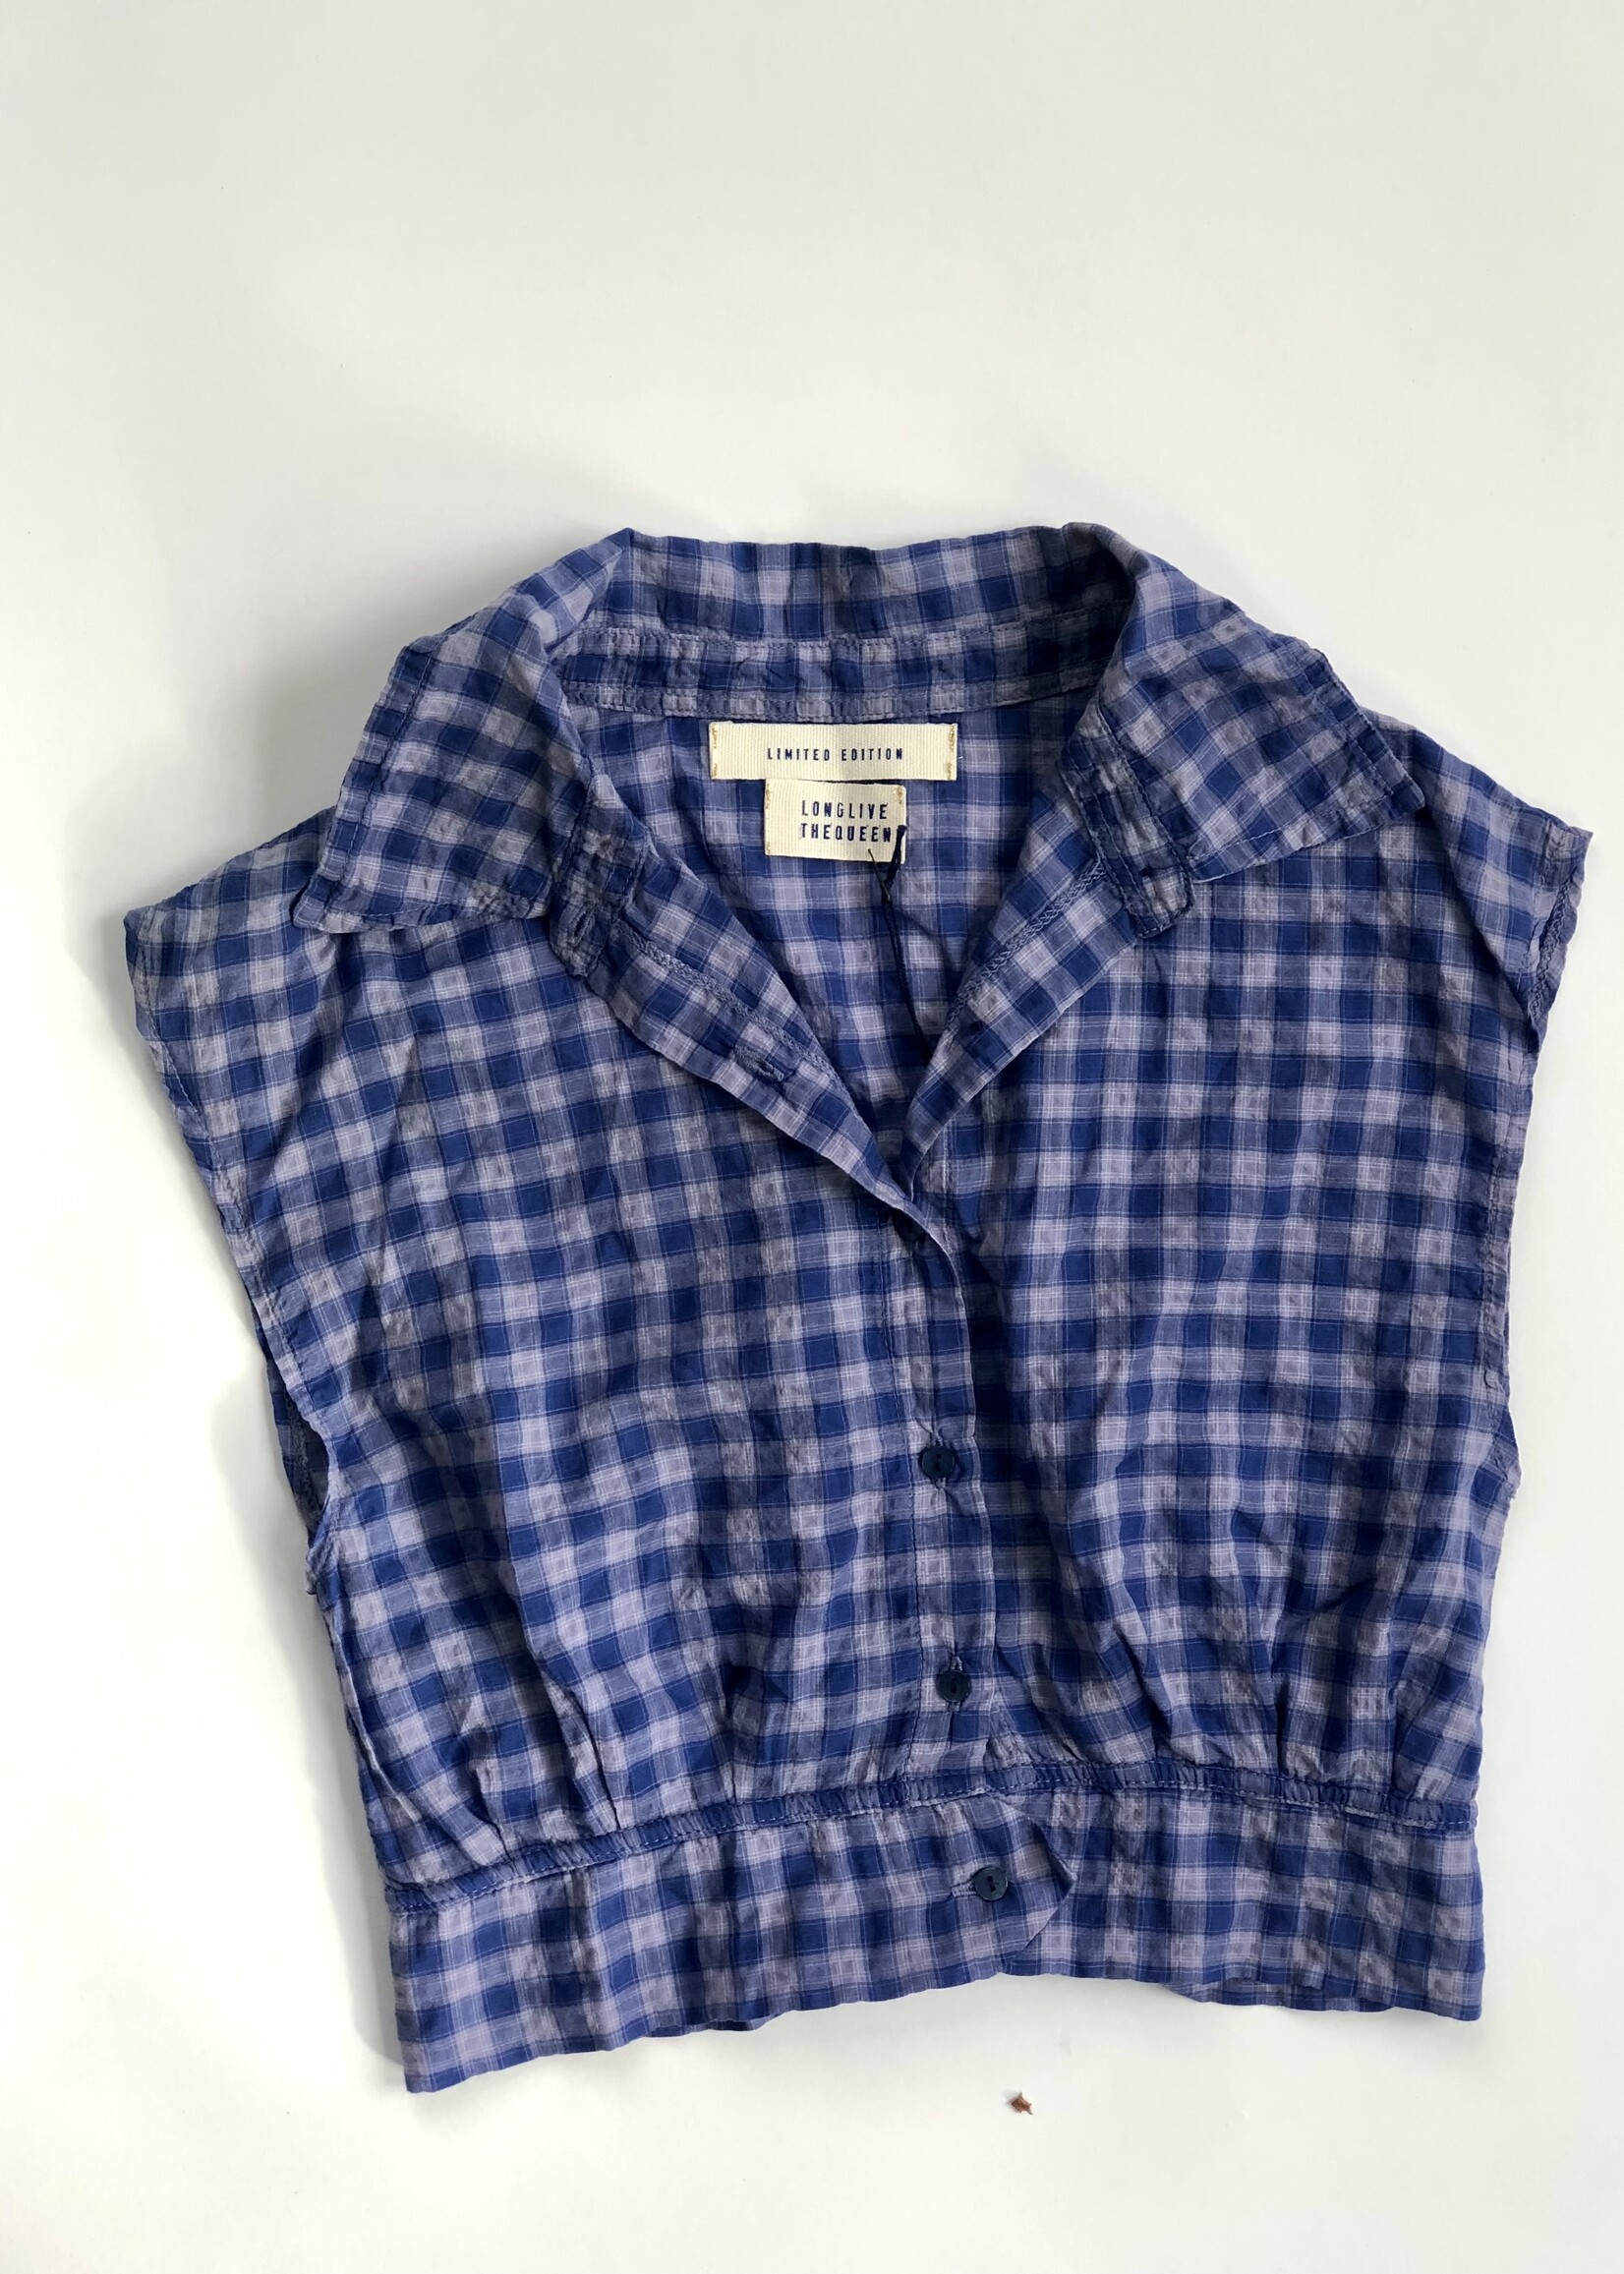 Long Live The Queen Limited Edition check shirt blouse 6-8y